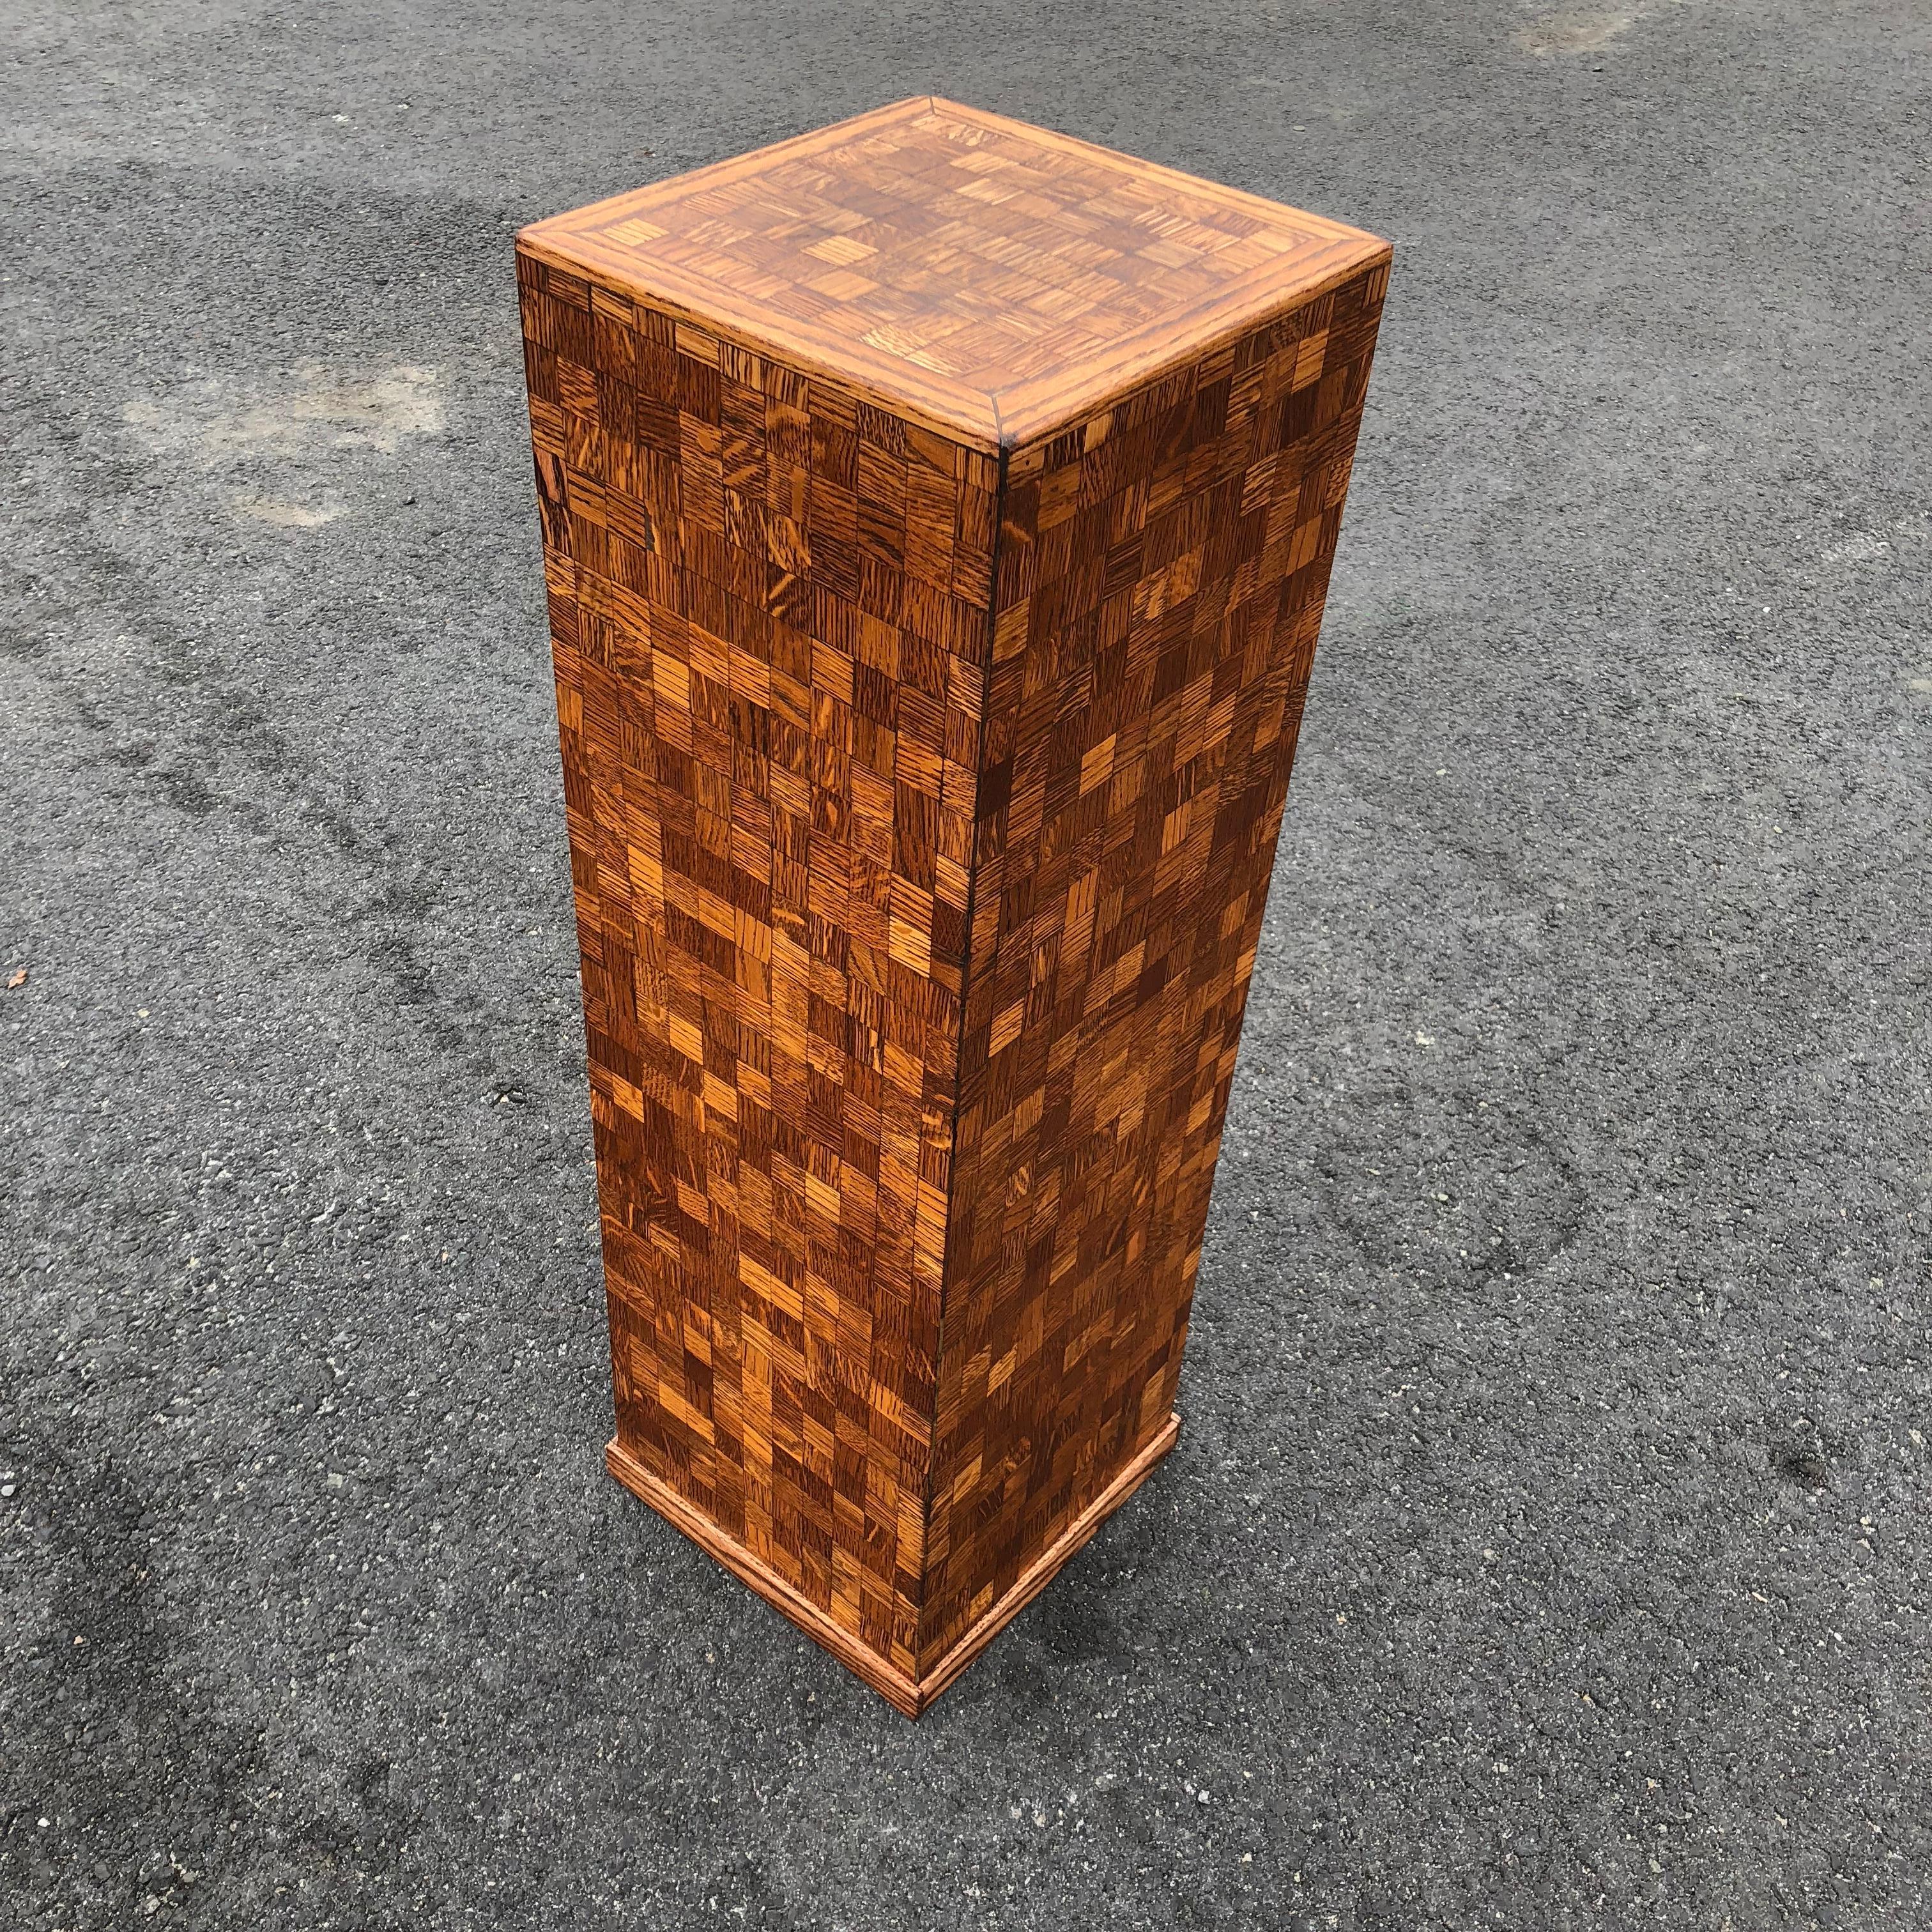 Square Mid-Century Modern Wooden Pedestal with Mosaic Wooden Tile Design 2